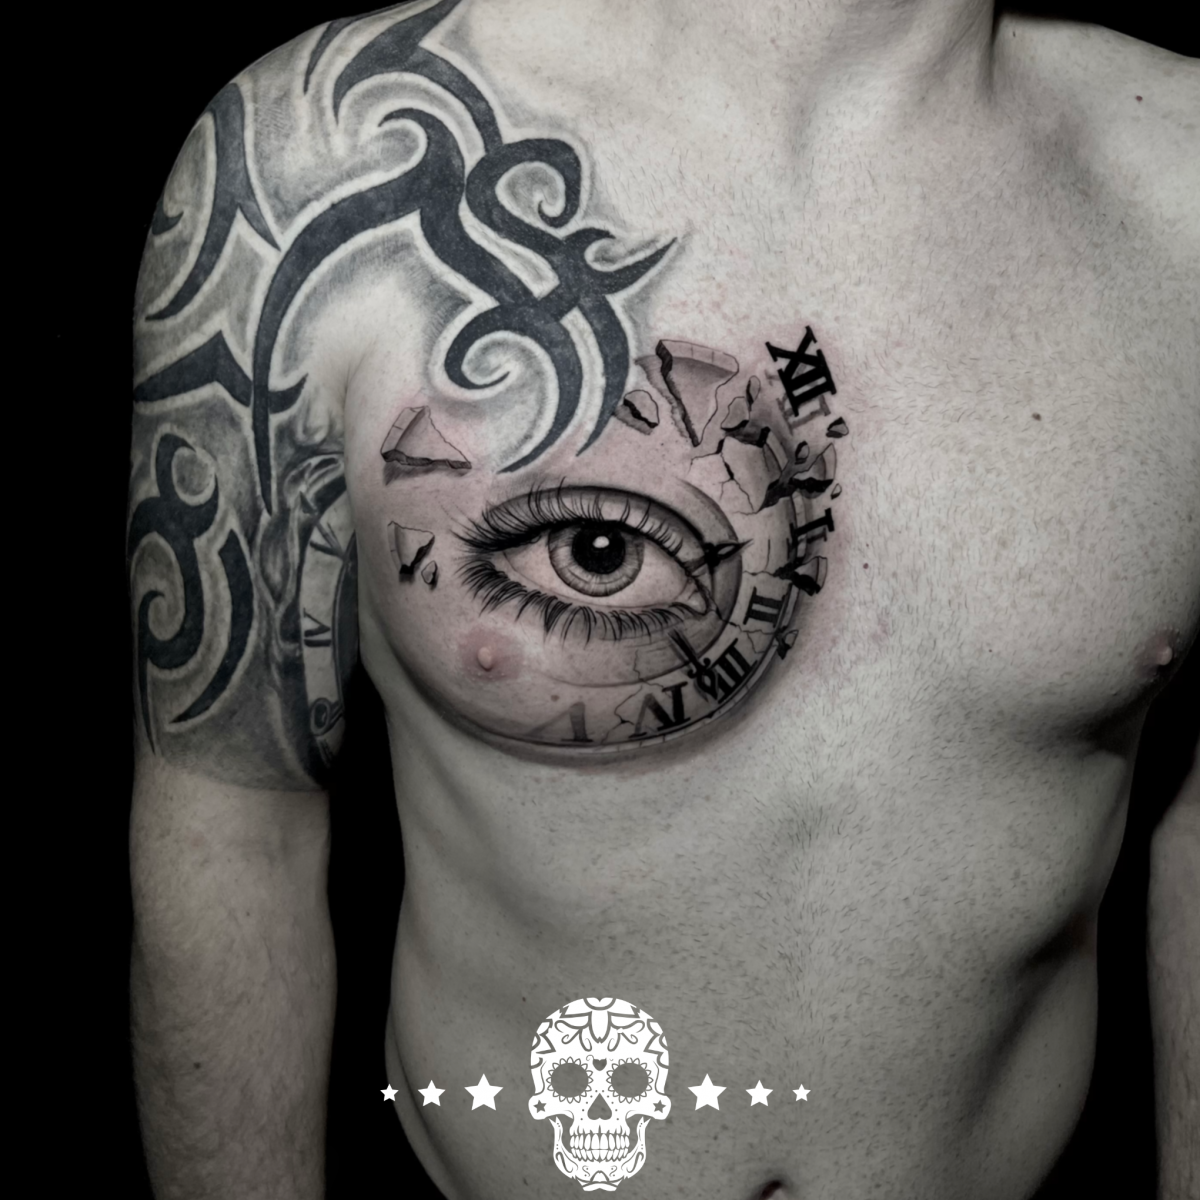  chest tattoos HD Photos  Wallpapers 5455 Images  Page 43